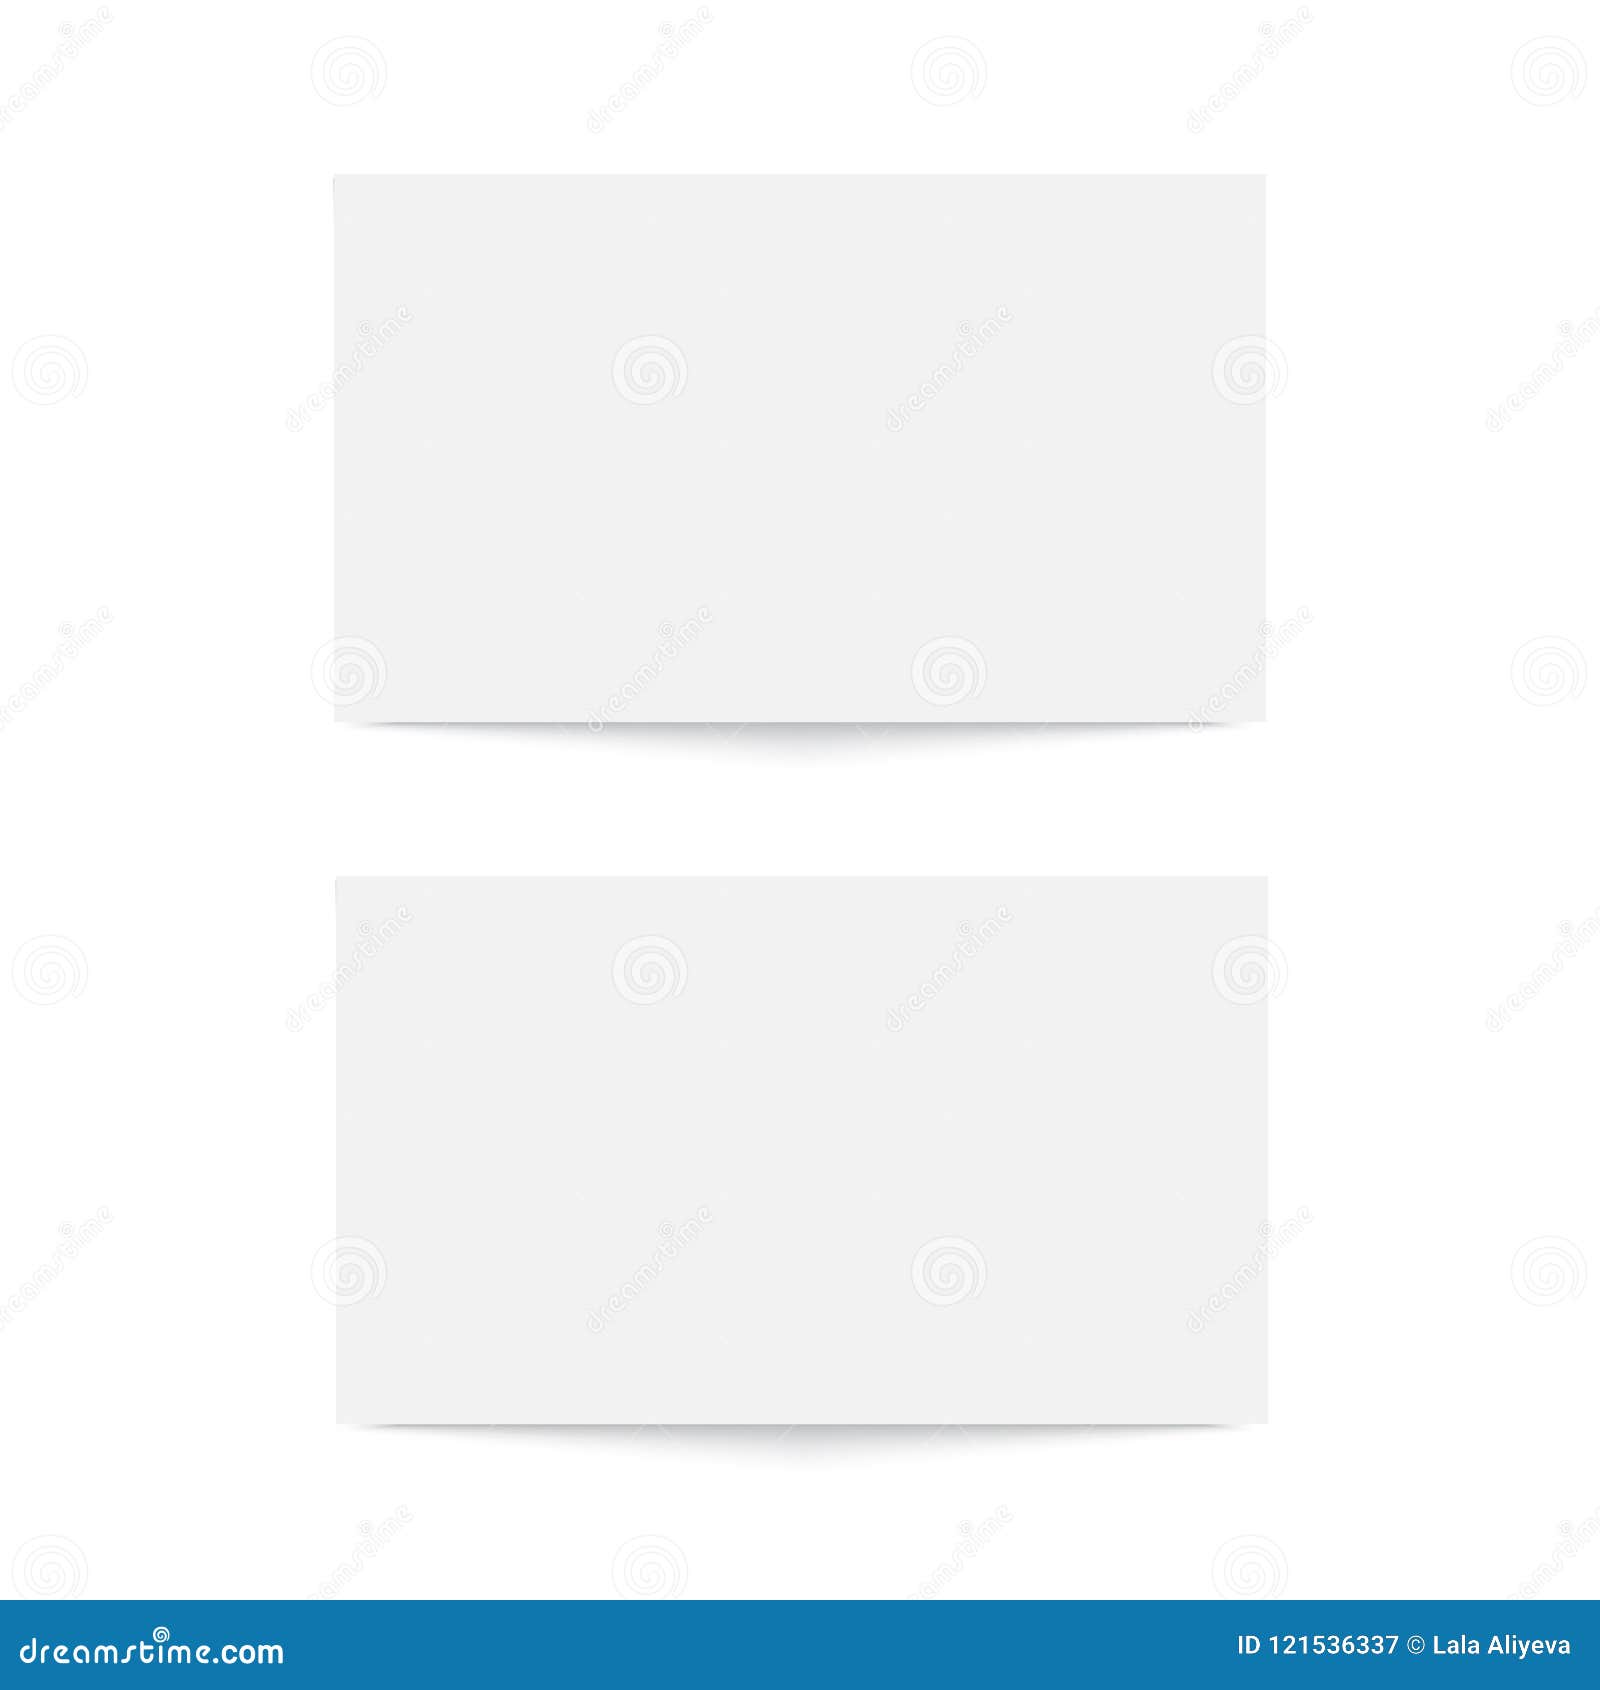 Blank, Empty Business Card Template for Front and Back Sides Throughout Plain Business Card Template